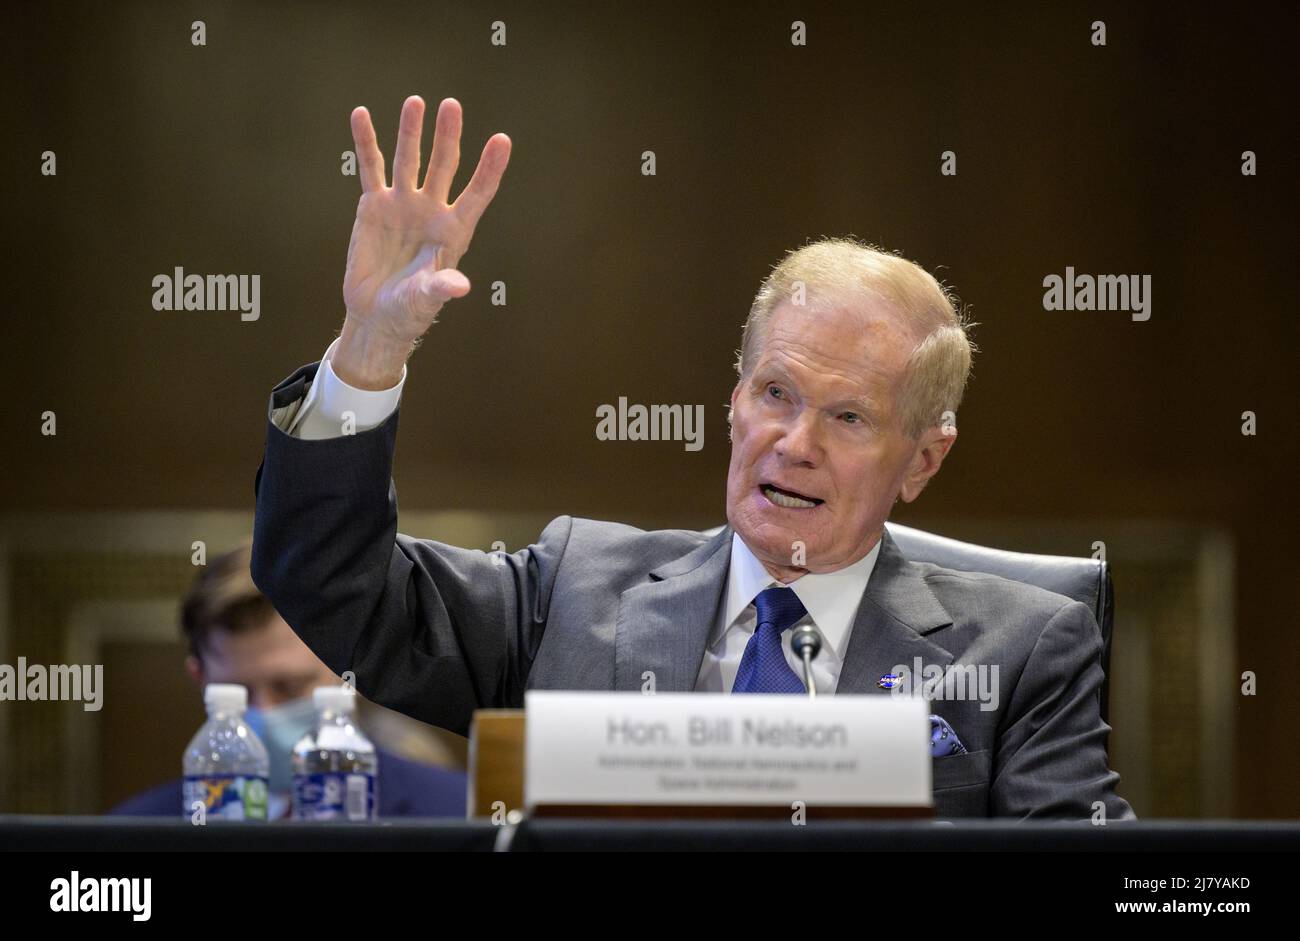 NASA Administrator Bill Nelson, testifies before the Senate Appropriations Commerce, Justice, Science, and Related Agencies subcommittee during the FY 2023 budget hearing, at the Dirksen Senate Office Building, May 3, 2022, in Washington, D.C. Stock Photo